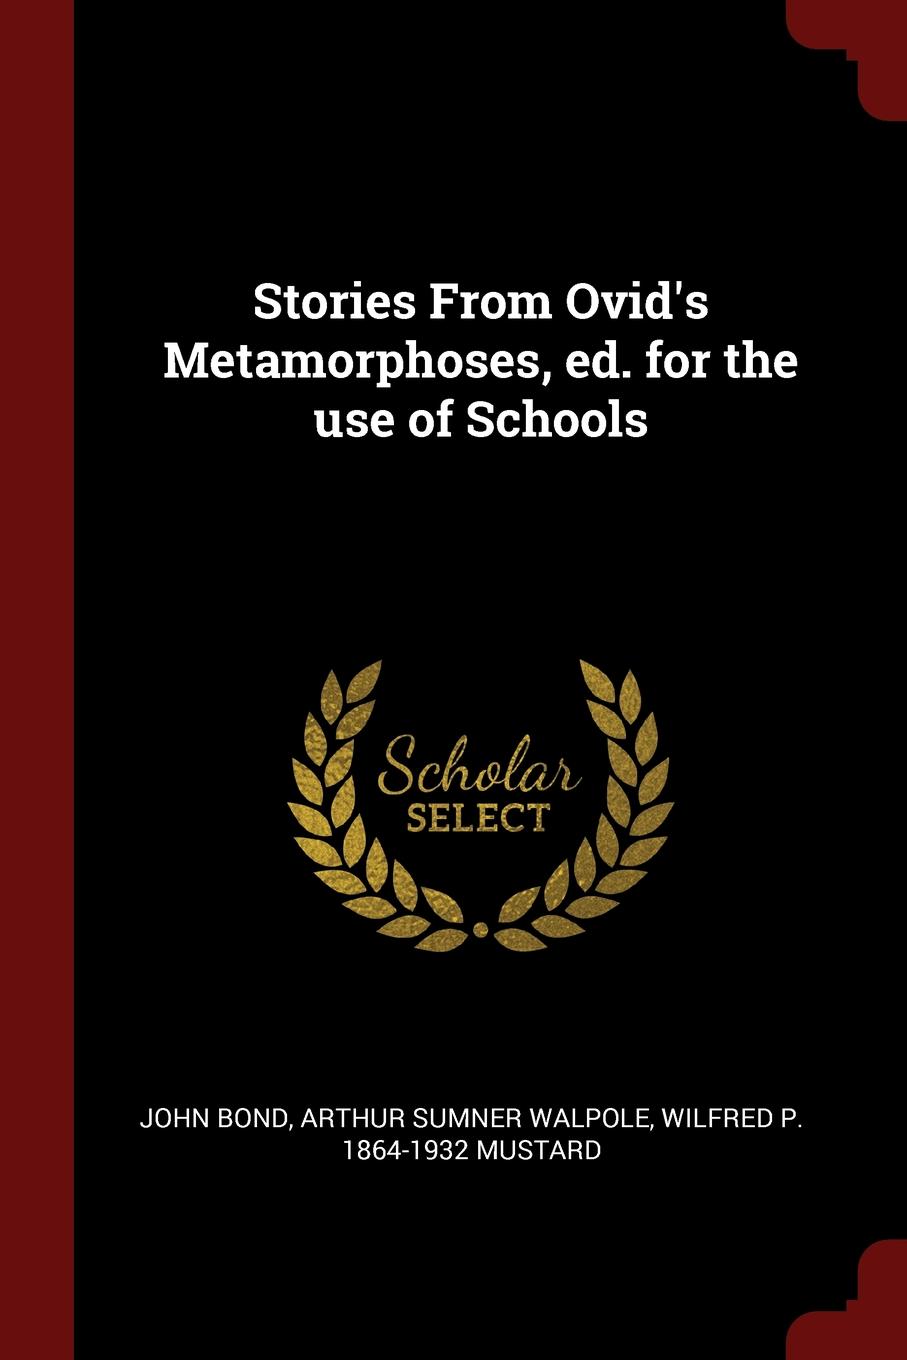 Stories From Ovid.s Metamorphoses, ed. for the use of Schools